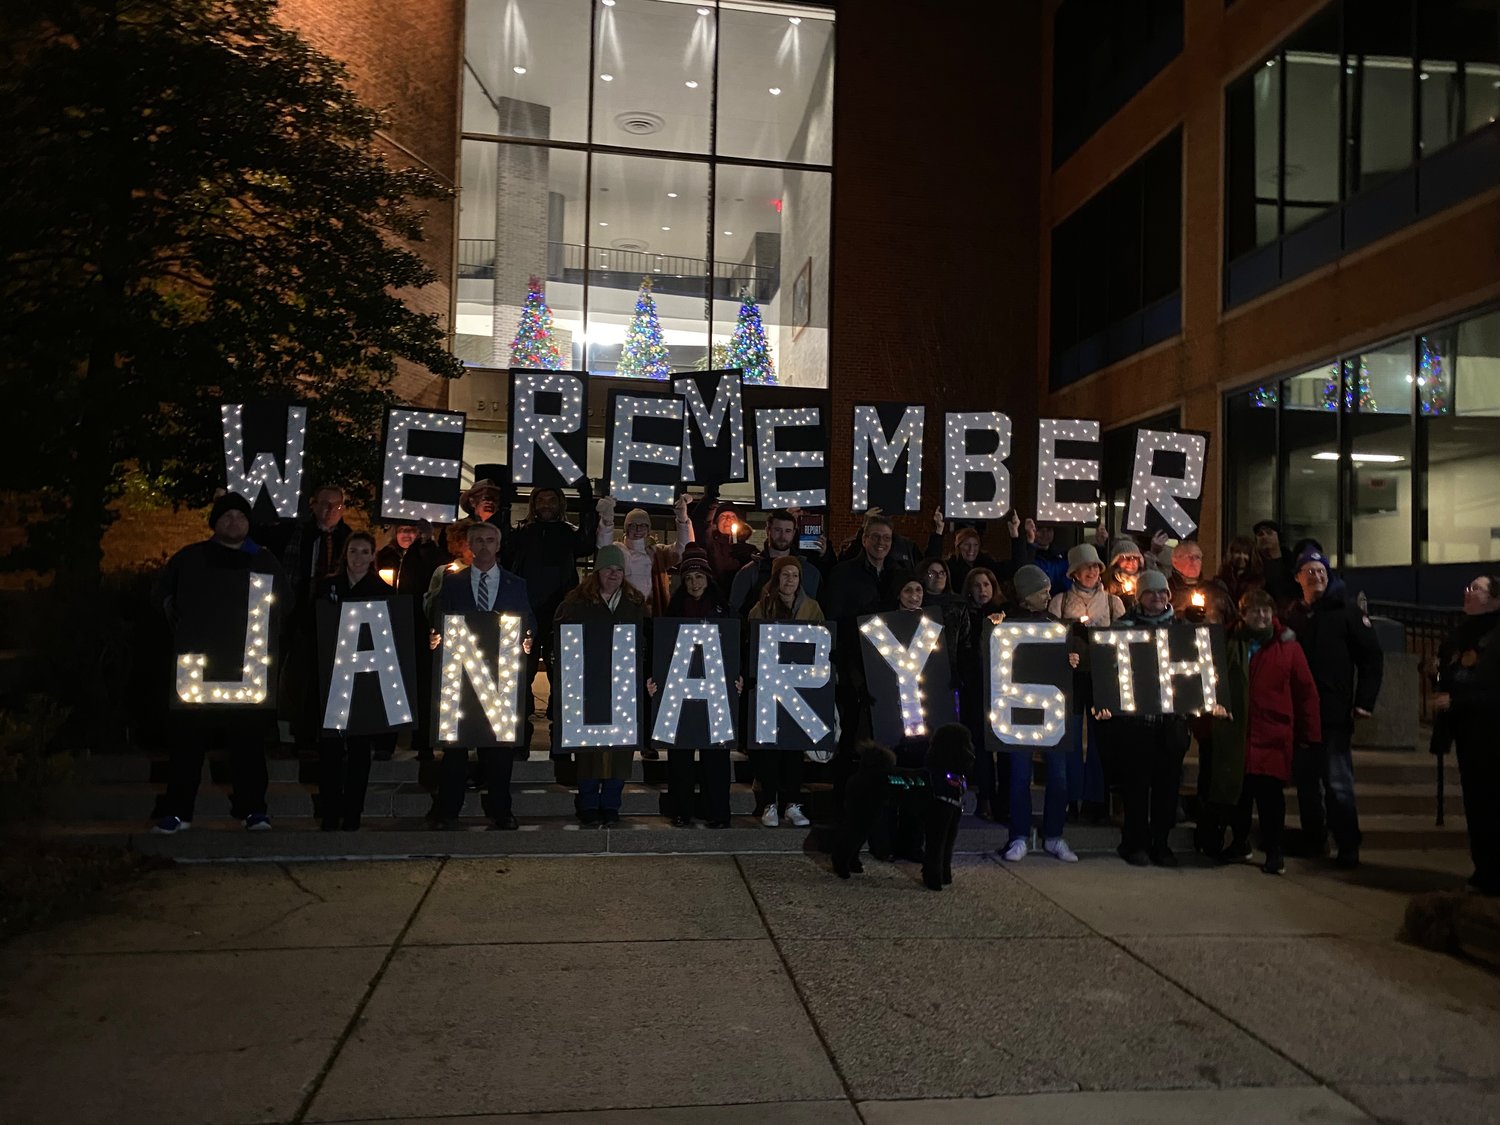 A “Vigil for Democracy” was held Friday night at the former Bucks County Courthouse to mark the second anniversary of the Jan.6 insurrection.